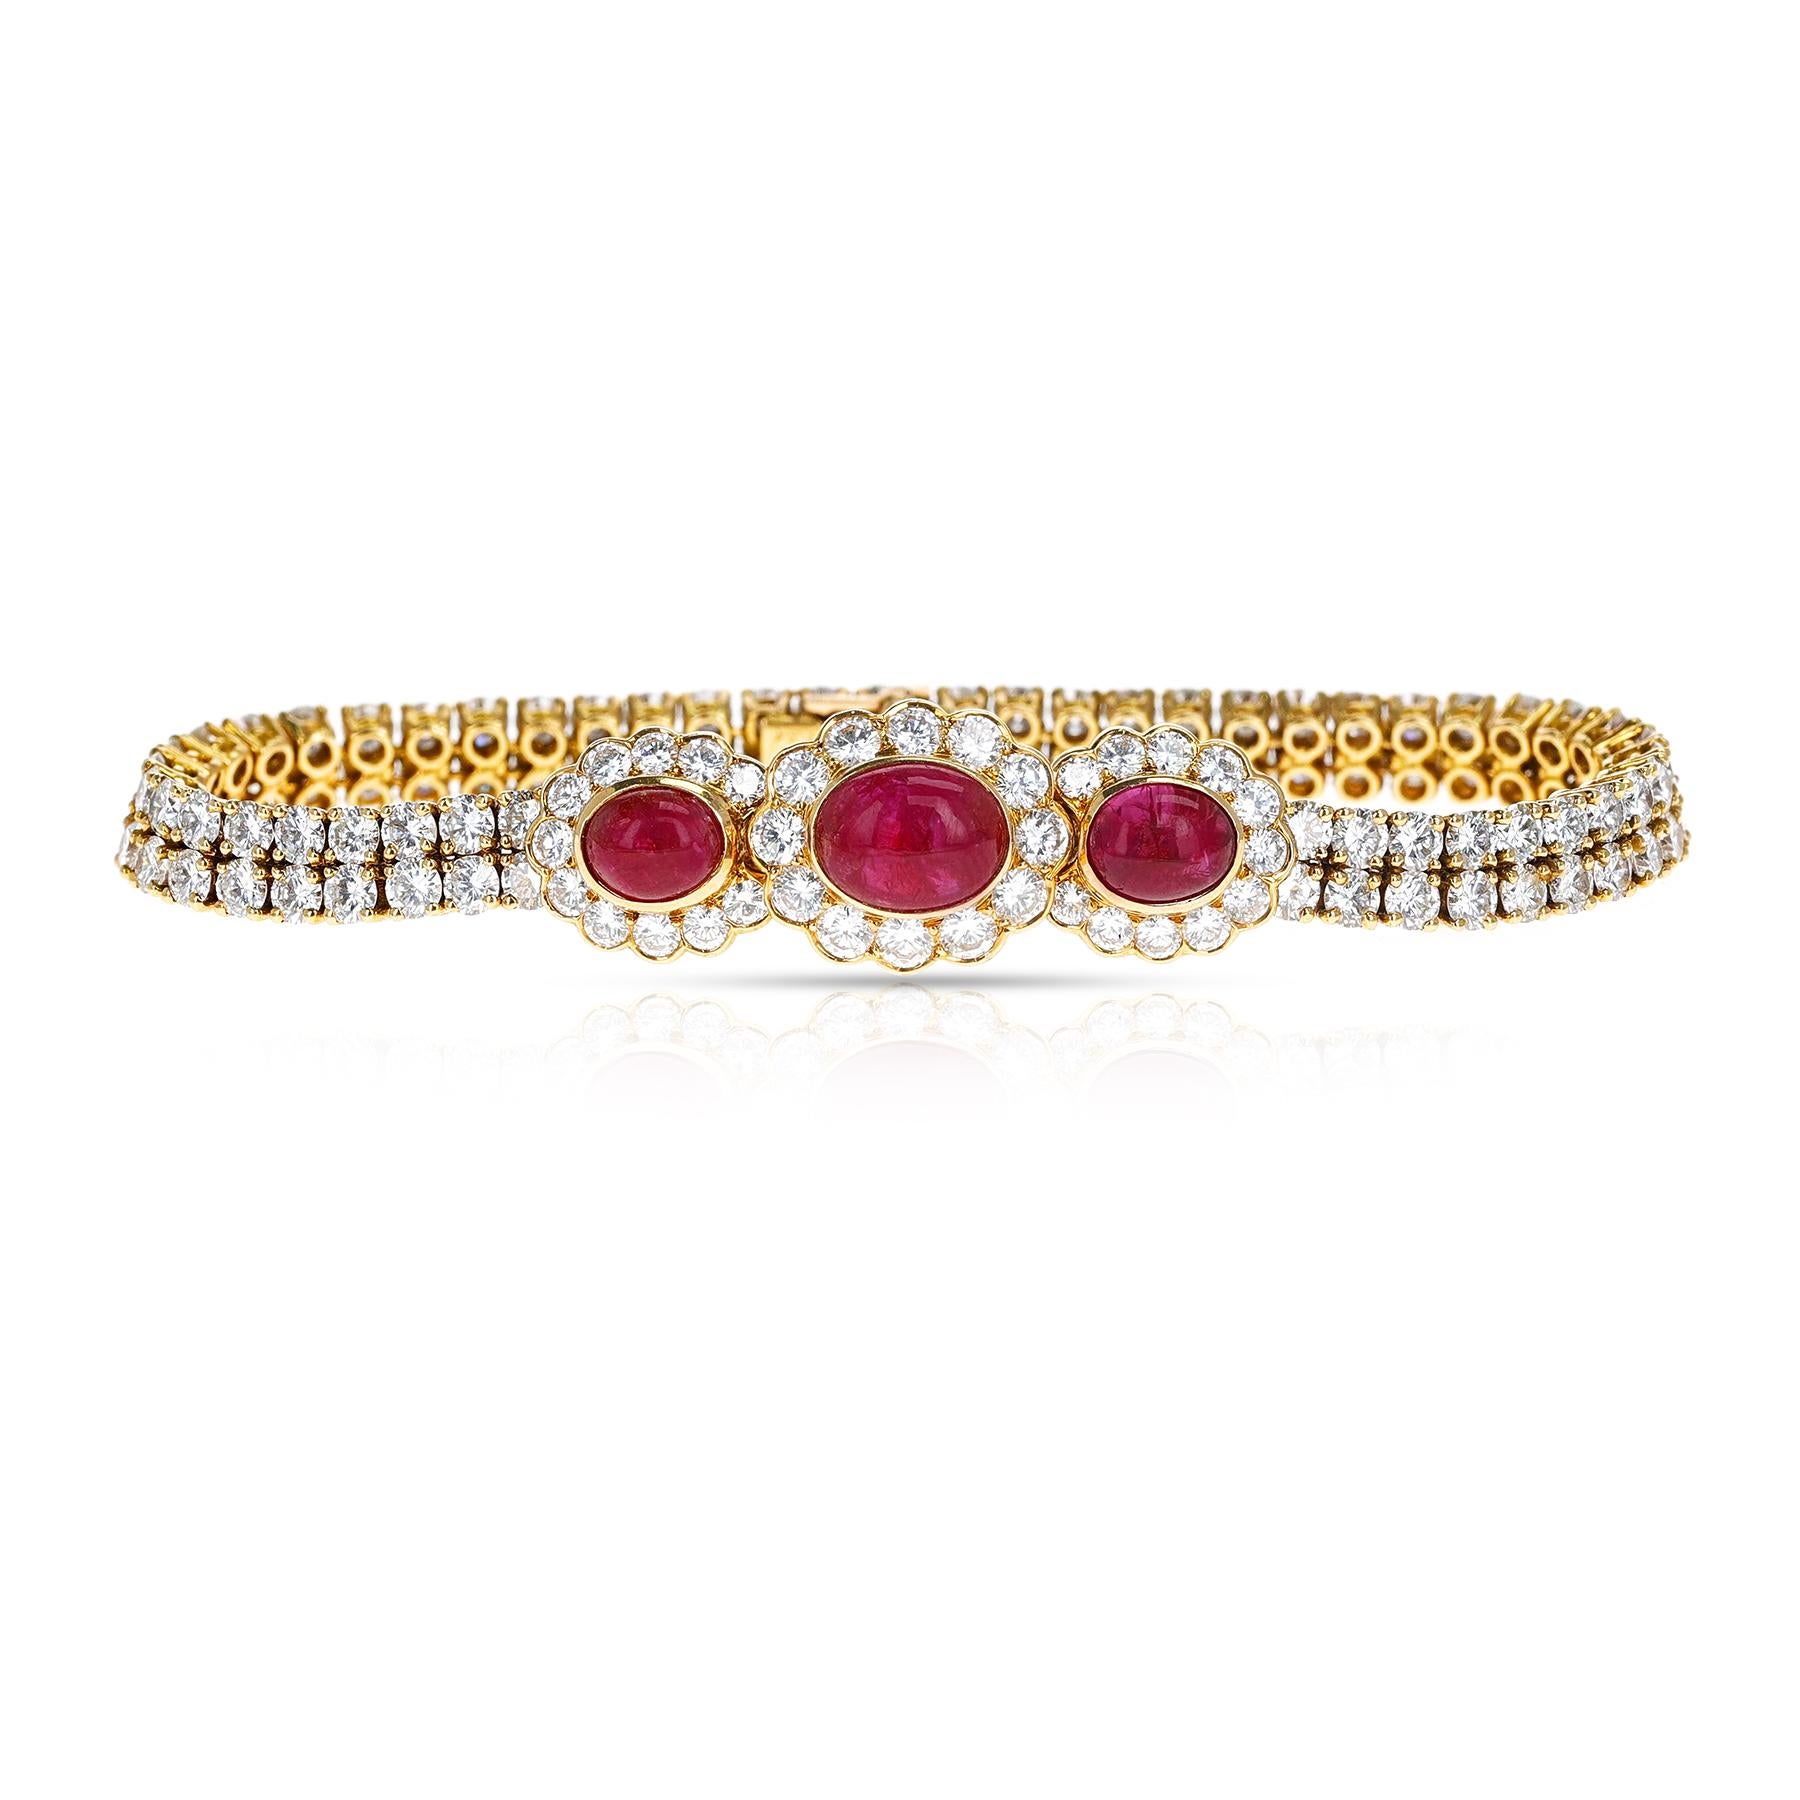 Van Cleef & Arpels Ruby Cabochon and Diamond Bracelet and Necklace Set, 18k In Excellent Condition For Sale In New York, NY